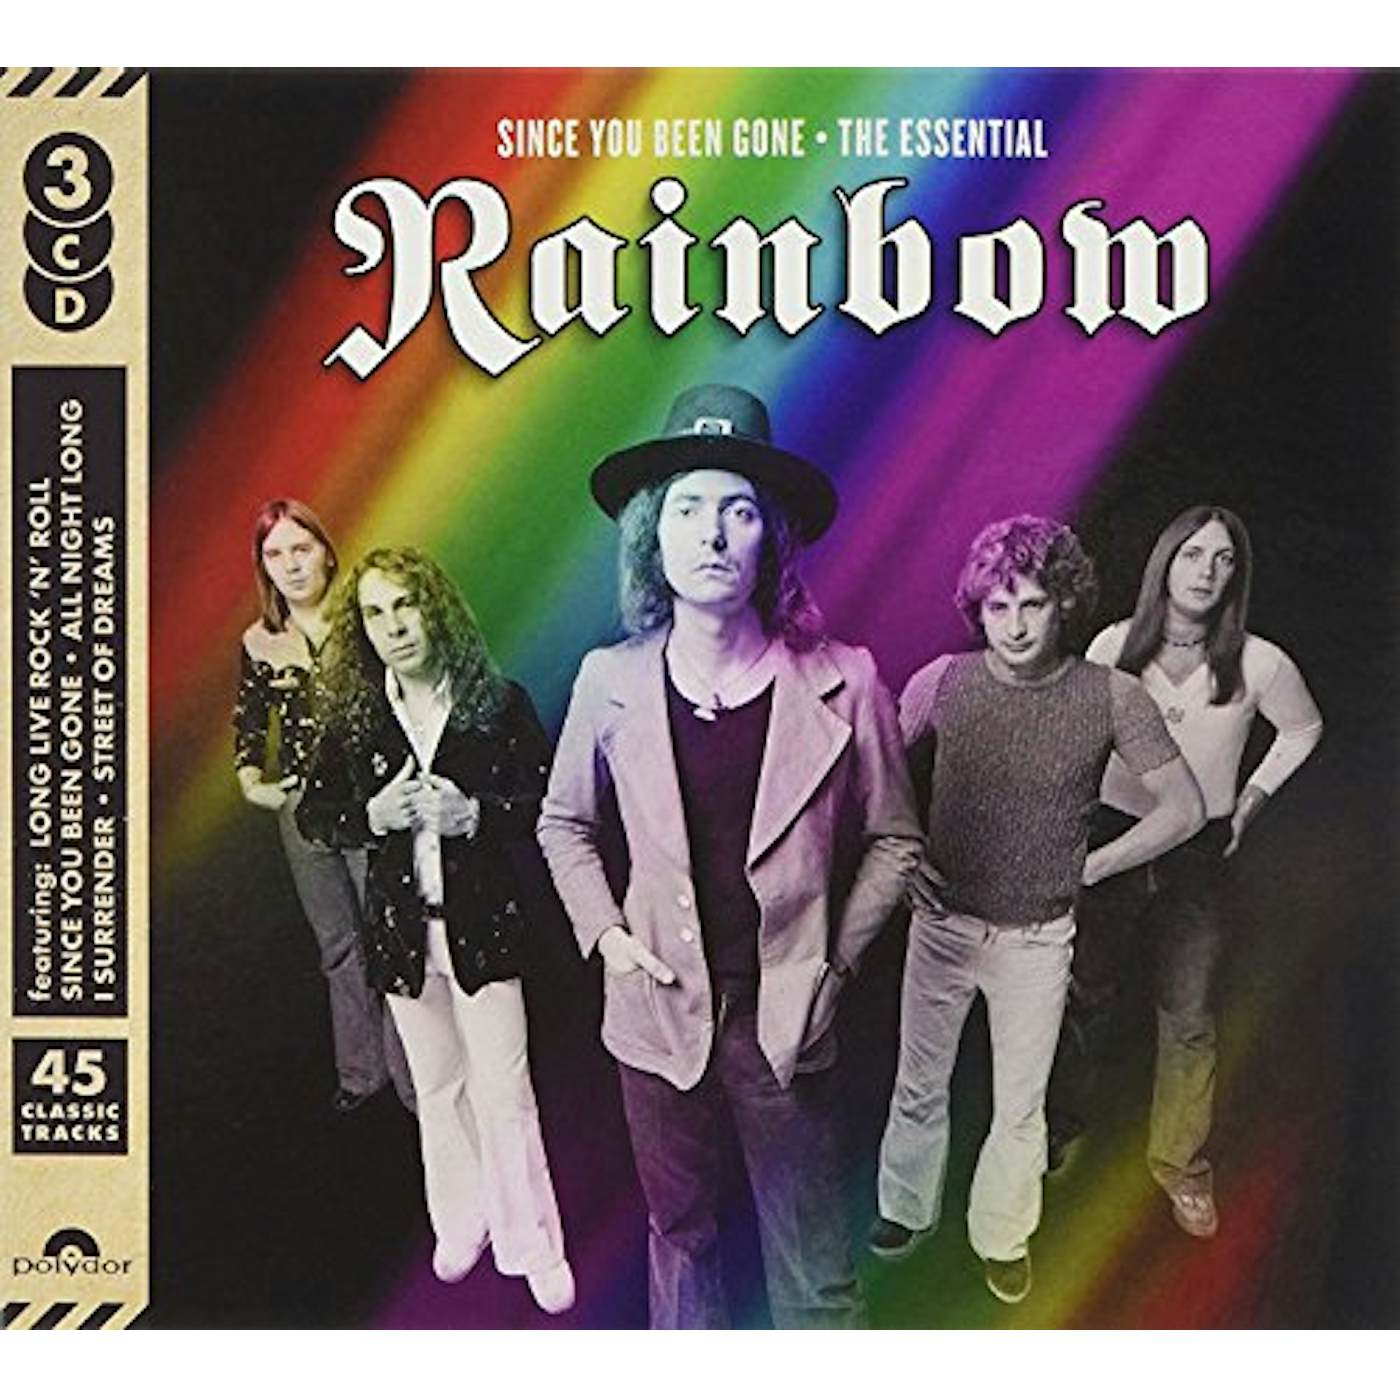 SINCE YOU BEEN GONE: THE ESSENTIAL RAINBOW CD